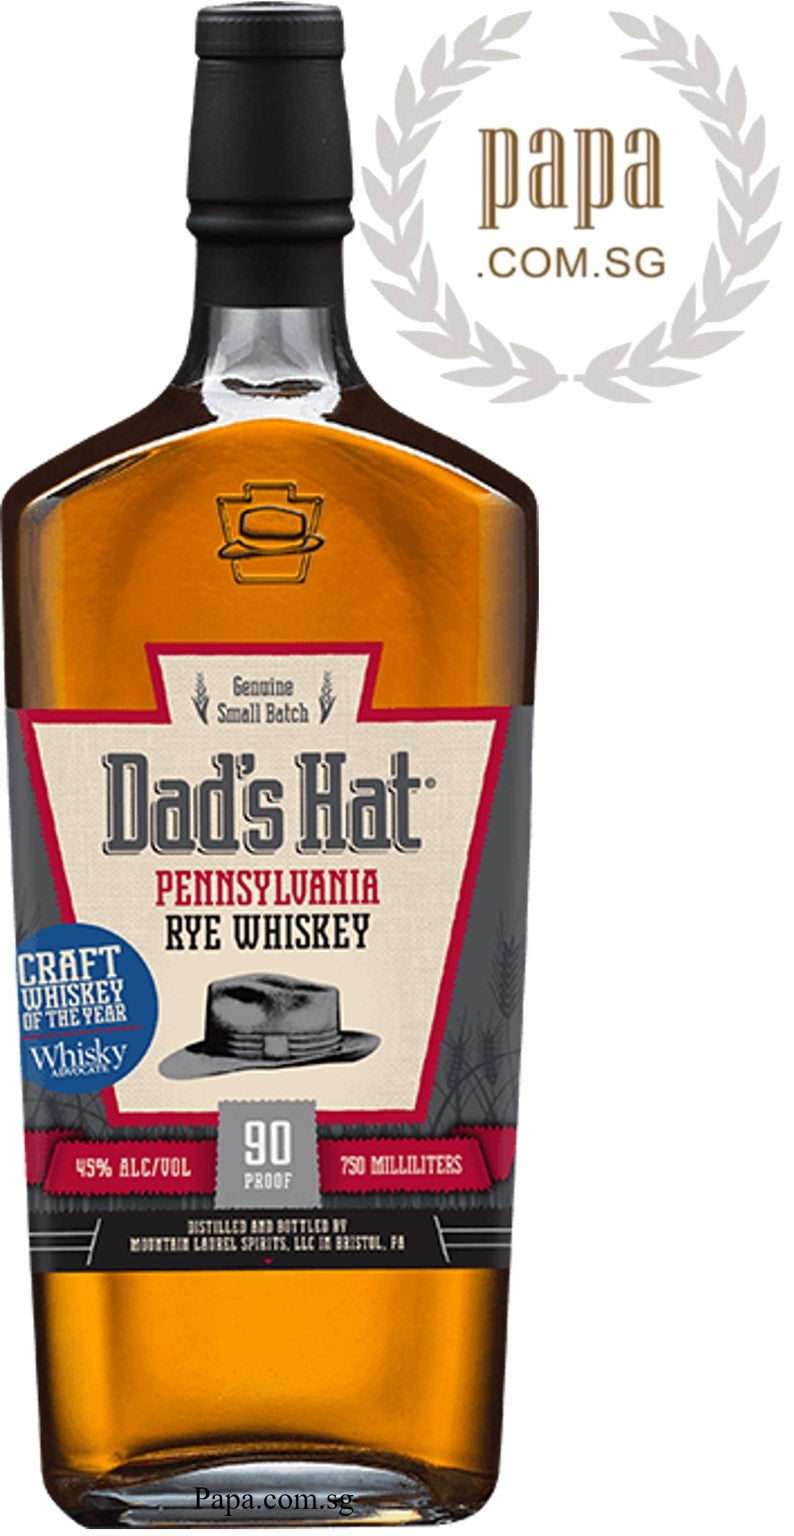 Dad's Hat Pennsylvania Small Batch Rye Whisky - 45% abv